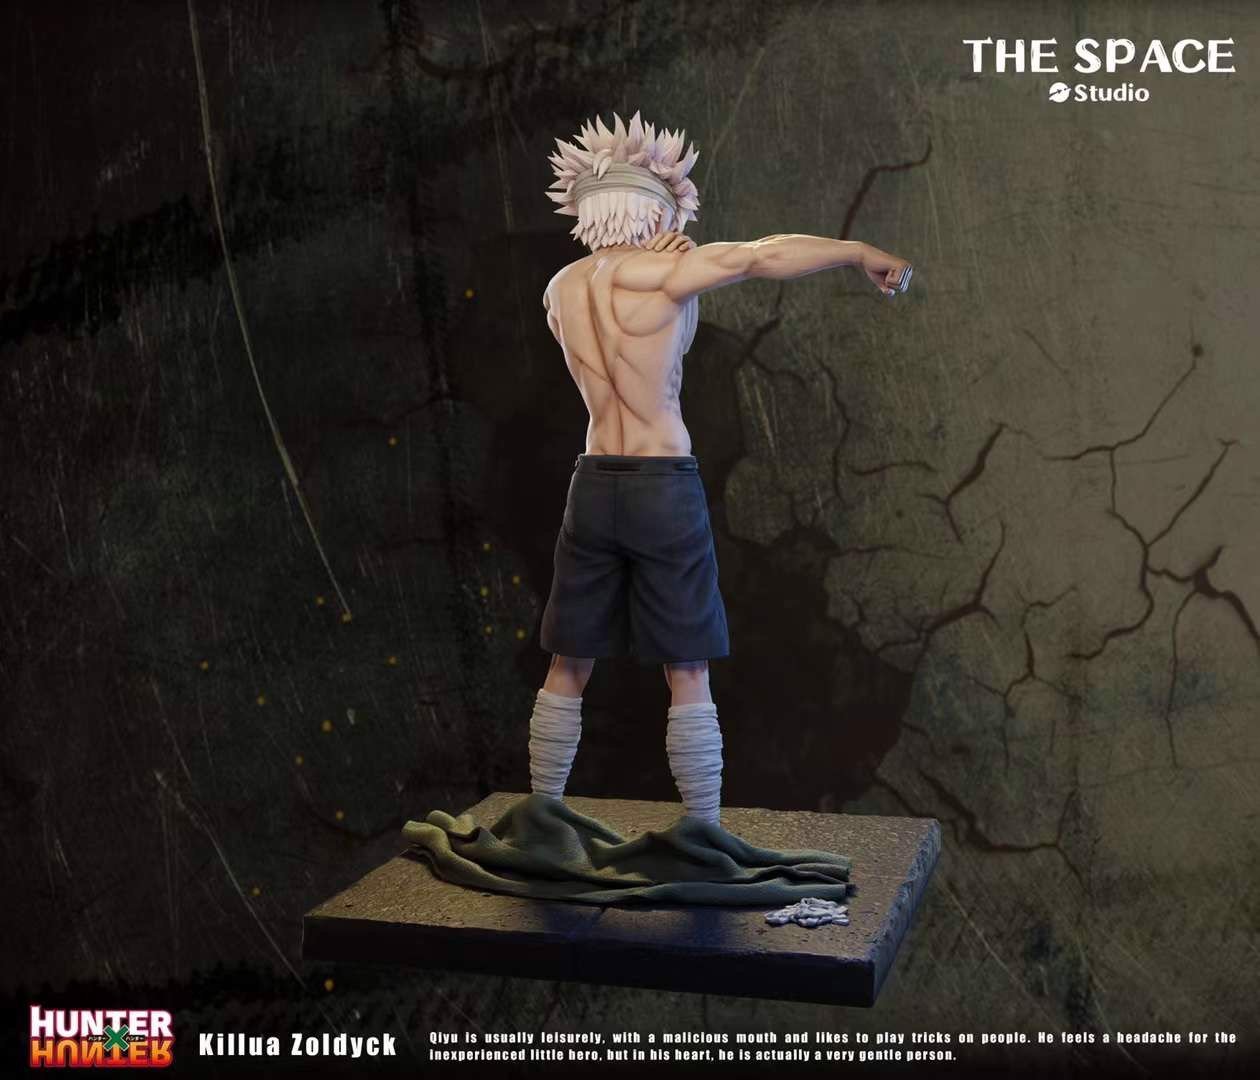 Studios: Stars Studios Character: GON. FREECSS Series: A Series of  Characters of Hunter X Hunter (SD Scale) Name of Work: Ep.1 GON. FREECSS  Dimensions: (H)21cm (W)22cm (L)22cm Scale of Item: SD Materi